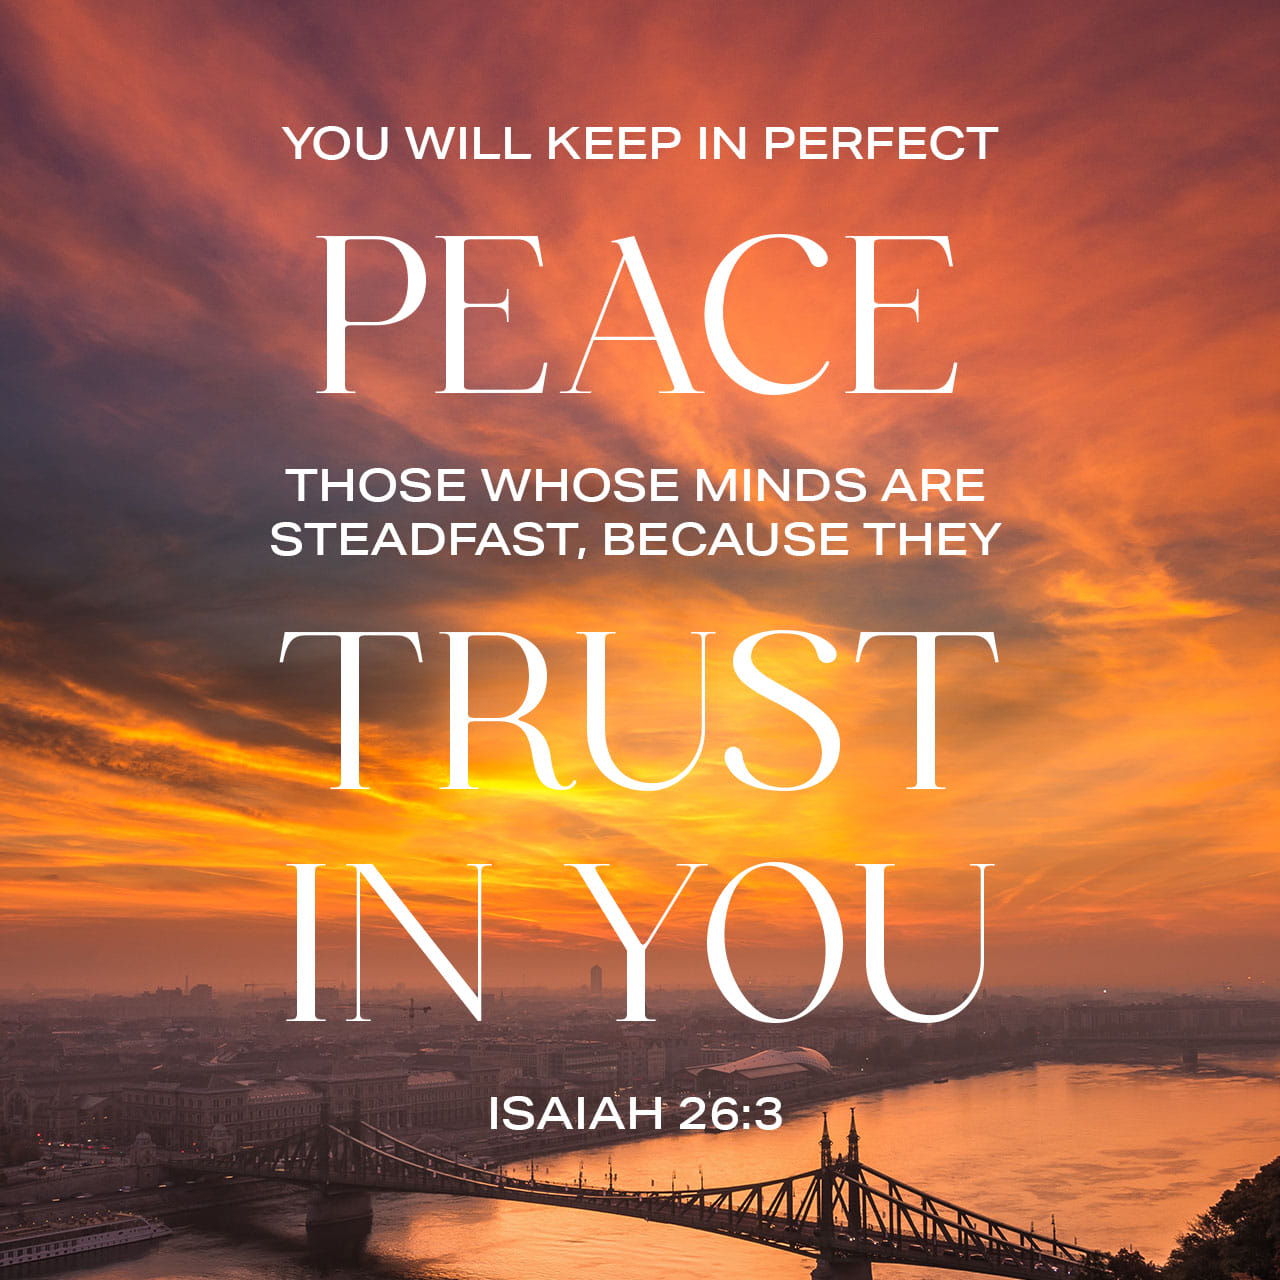 Isaiah 26:3 Thou wilt keep him in perfect peace, whose mind is stayed on thee: because he trusteth in thee. You will keep him in perfect peace, Whose mind is stayed on